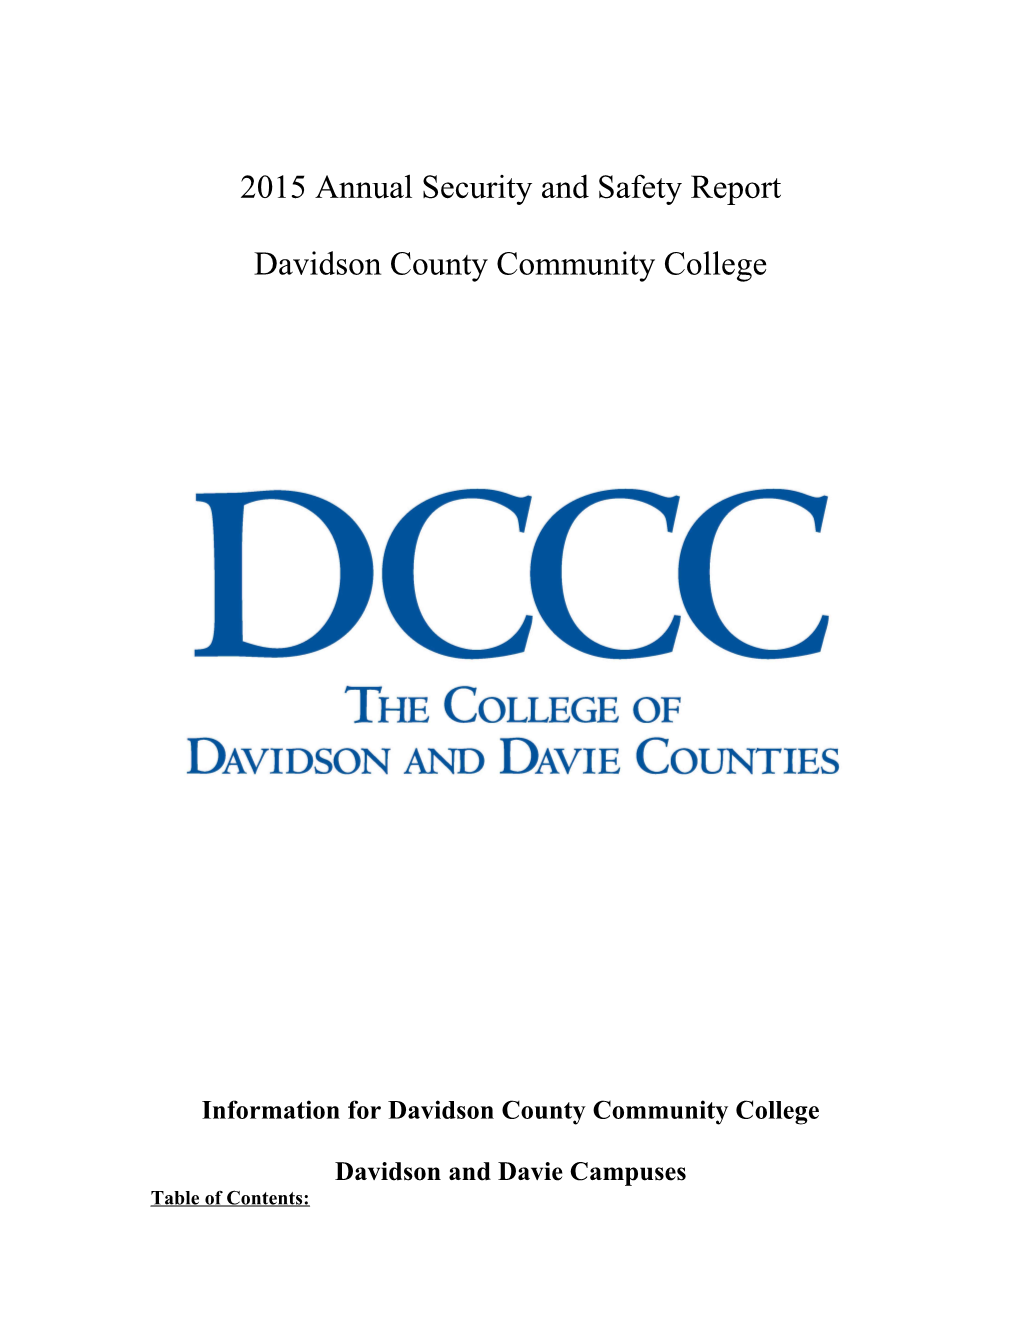 Information for Davidson County Community College